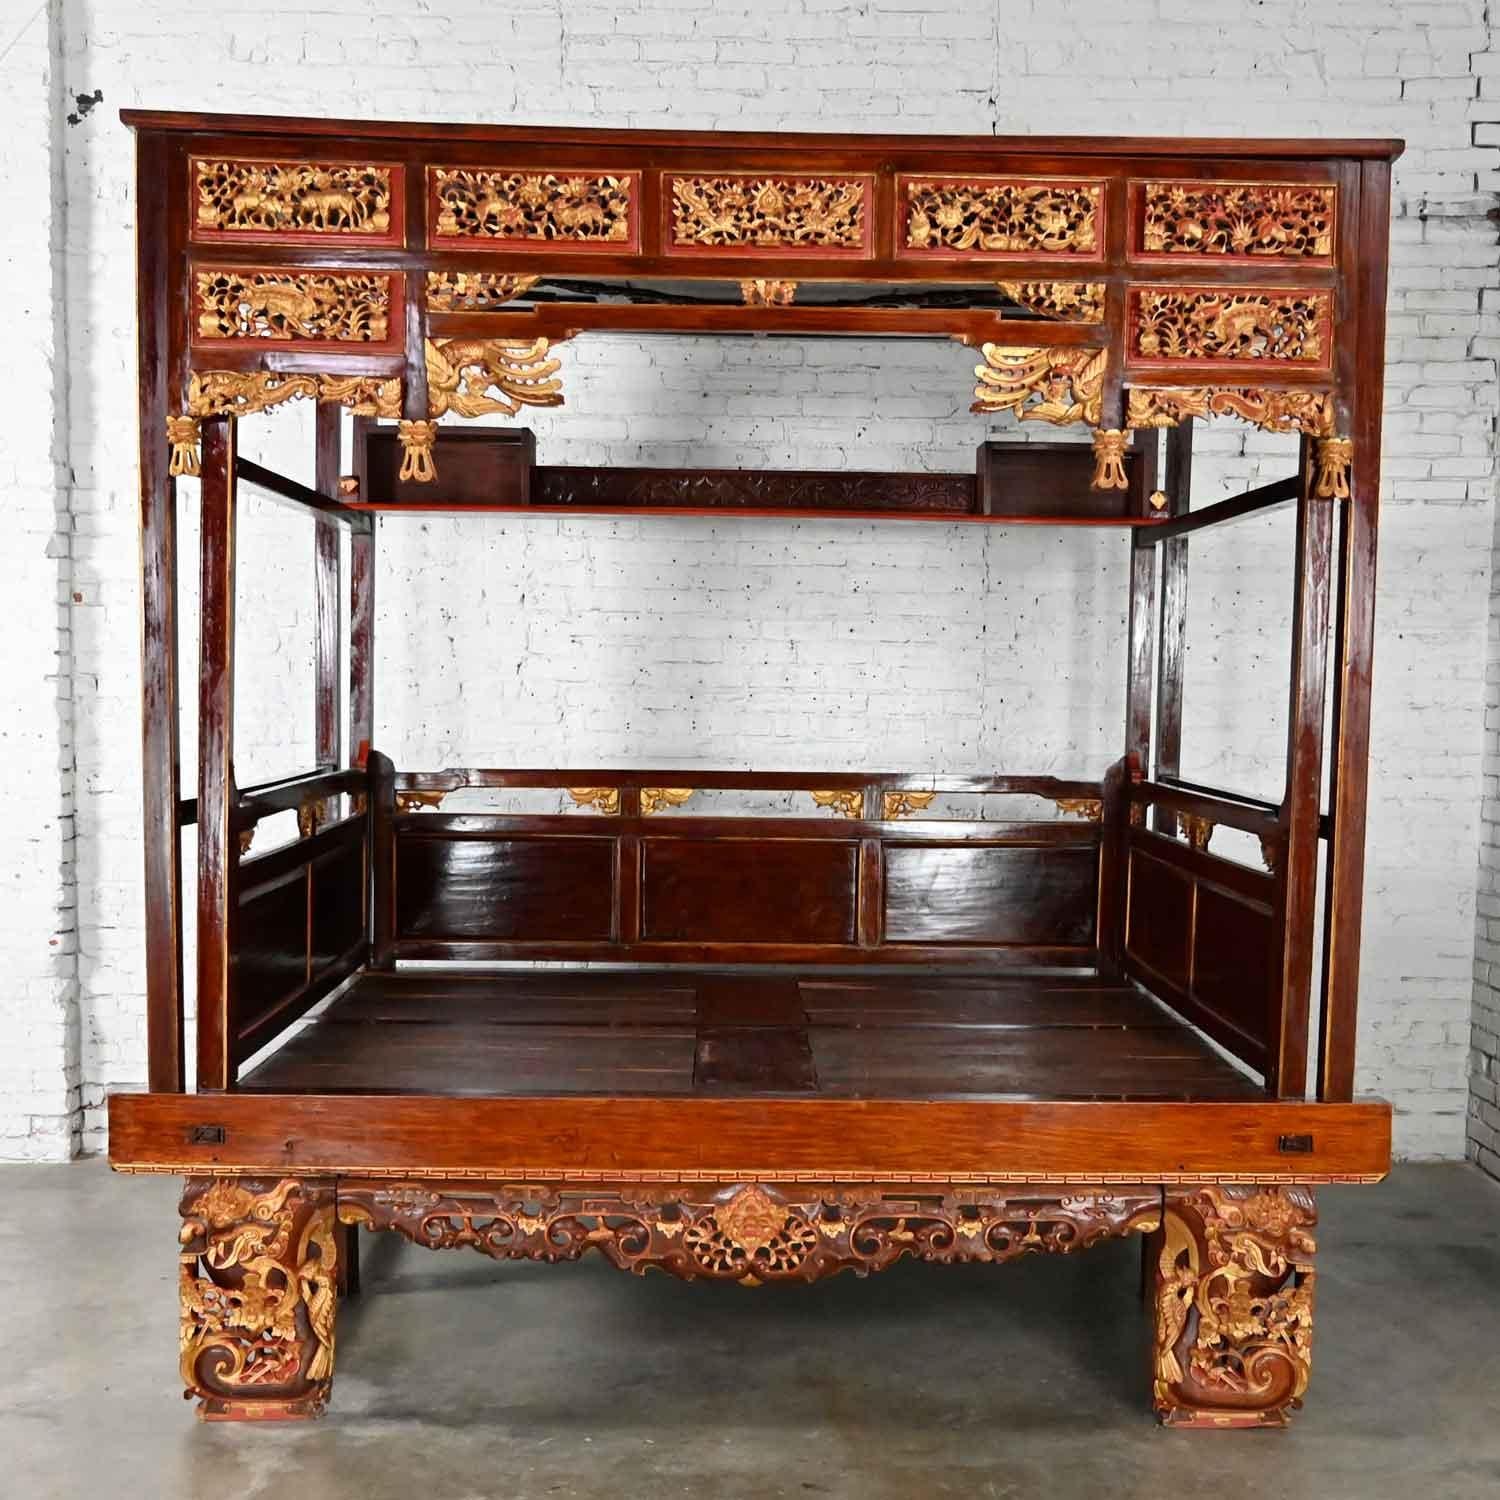 Phenomenal vintage chinoiserie Chinese Wedding opium canopy bed comprised of Chinese elm and all-over hand carved Asian gilded designs. It will hold a queen size mattress and is made up of 60+ individual pieces but will be shipped partially